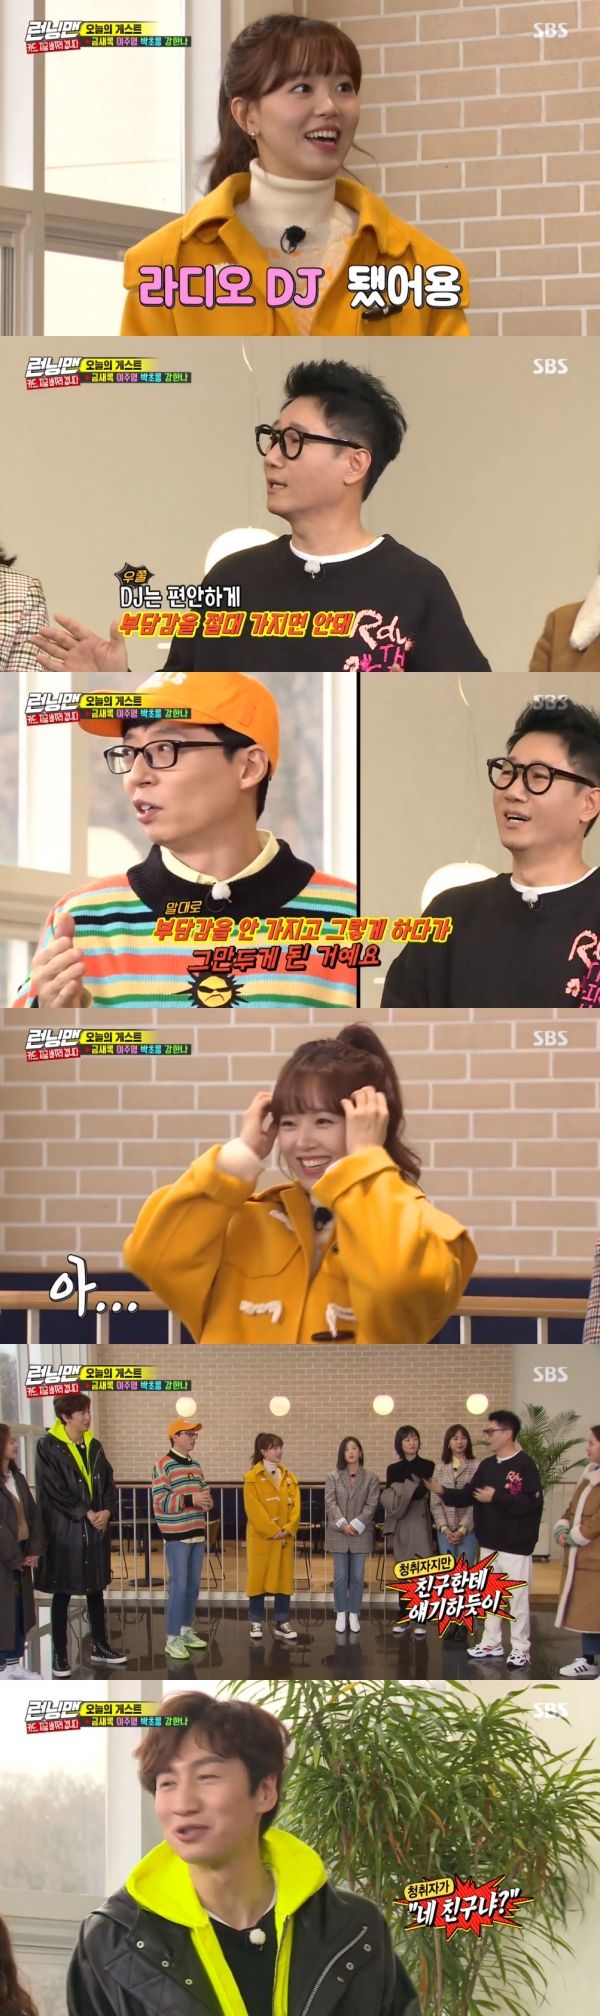 Kang Han-Na has become a Radio DJ, the report said.On SBS Running Man broadcast on the 19th, Ji Suk-jin advised guest Kang Han-Na as a DJ senior as a radi.On this day, guest Kang Han-Na announced that KBS Cool FM Raise Volume DJ.Watching, Ji Suk-jin advised Kang Han-Na: DJ should never be comfortable, never burdened.Yoo Jae-Suk added to Ji Suk-jin, My brother did not feel burdened and then quit. Kim Jong-guk said, There should be a burden.Without giving in, Ji Suk-jin continued his advice, Like talking to Friend, like talking to your sister.Yoo Jae-Suk added jokingly, So I got scolded, not Friend, but because I talked like Friend, and the members laughed.On the other hand, guest Park Chan-long showed a side protrusion with one hand on the floor, and the members admiration continued.